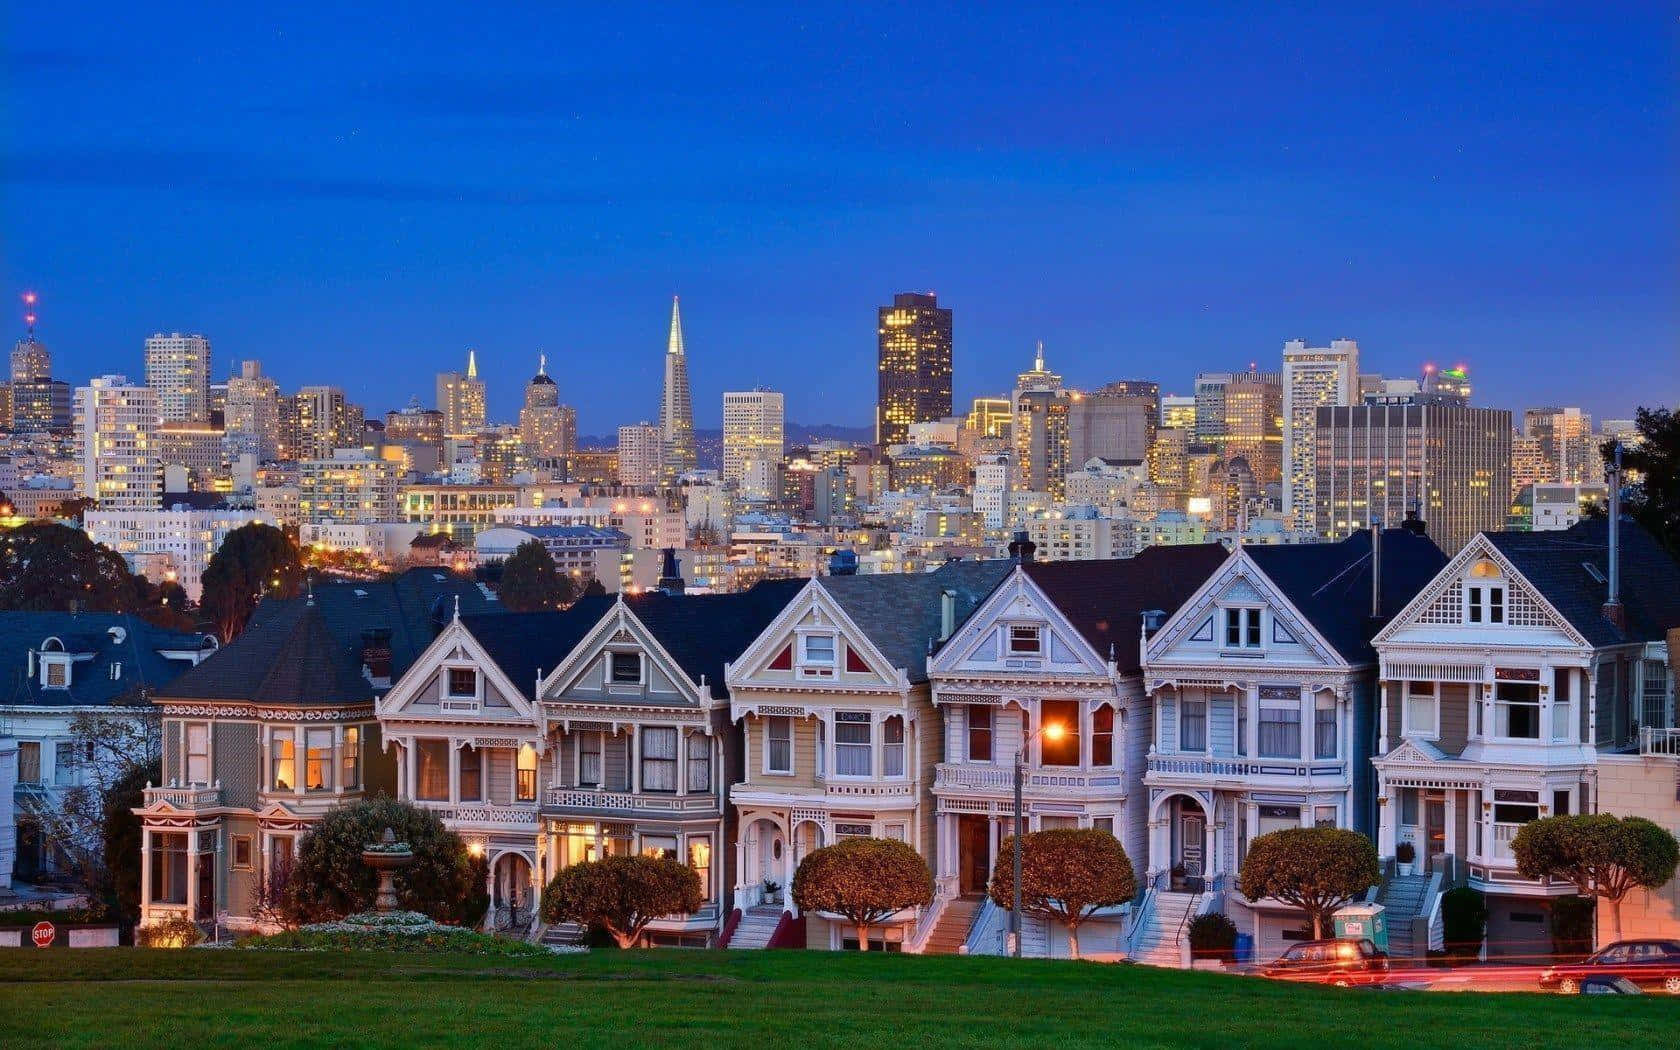 Get Your Work Done Anywhere With A San Francisco Laptop Background